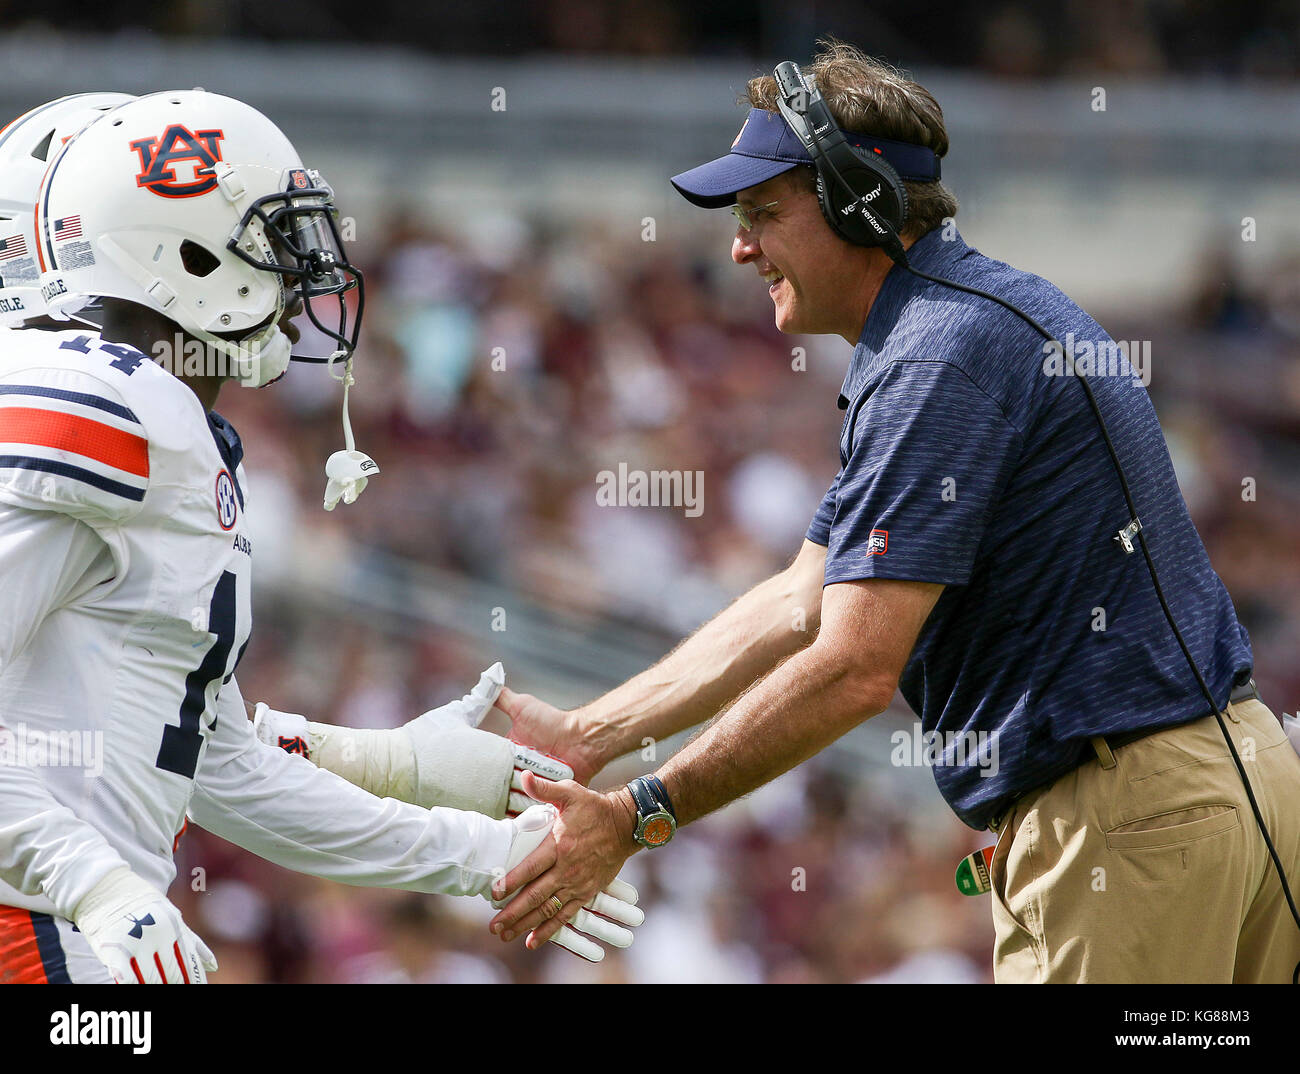 November 4, 2017: Auburn Tigers head coach Gus Malzahn shakes the hands of his players during a timeout in the fourth quarter during the NCAA football game between the Auburn Tigers and the Texas A&M Aggies at Kyle Field in College Station, TX; John Glaser/CSM. Stock Photo